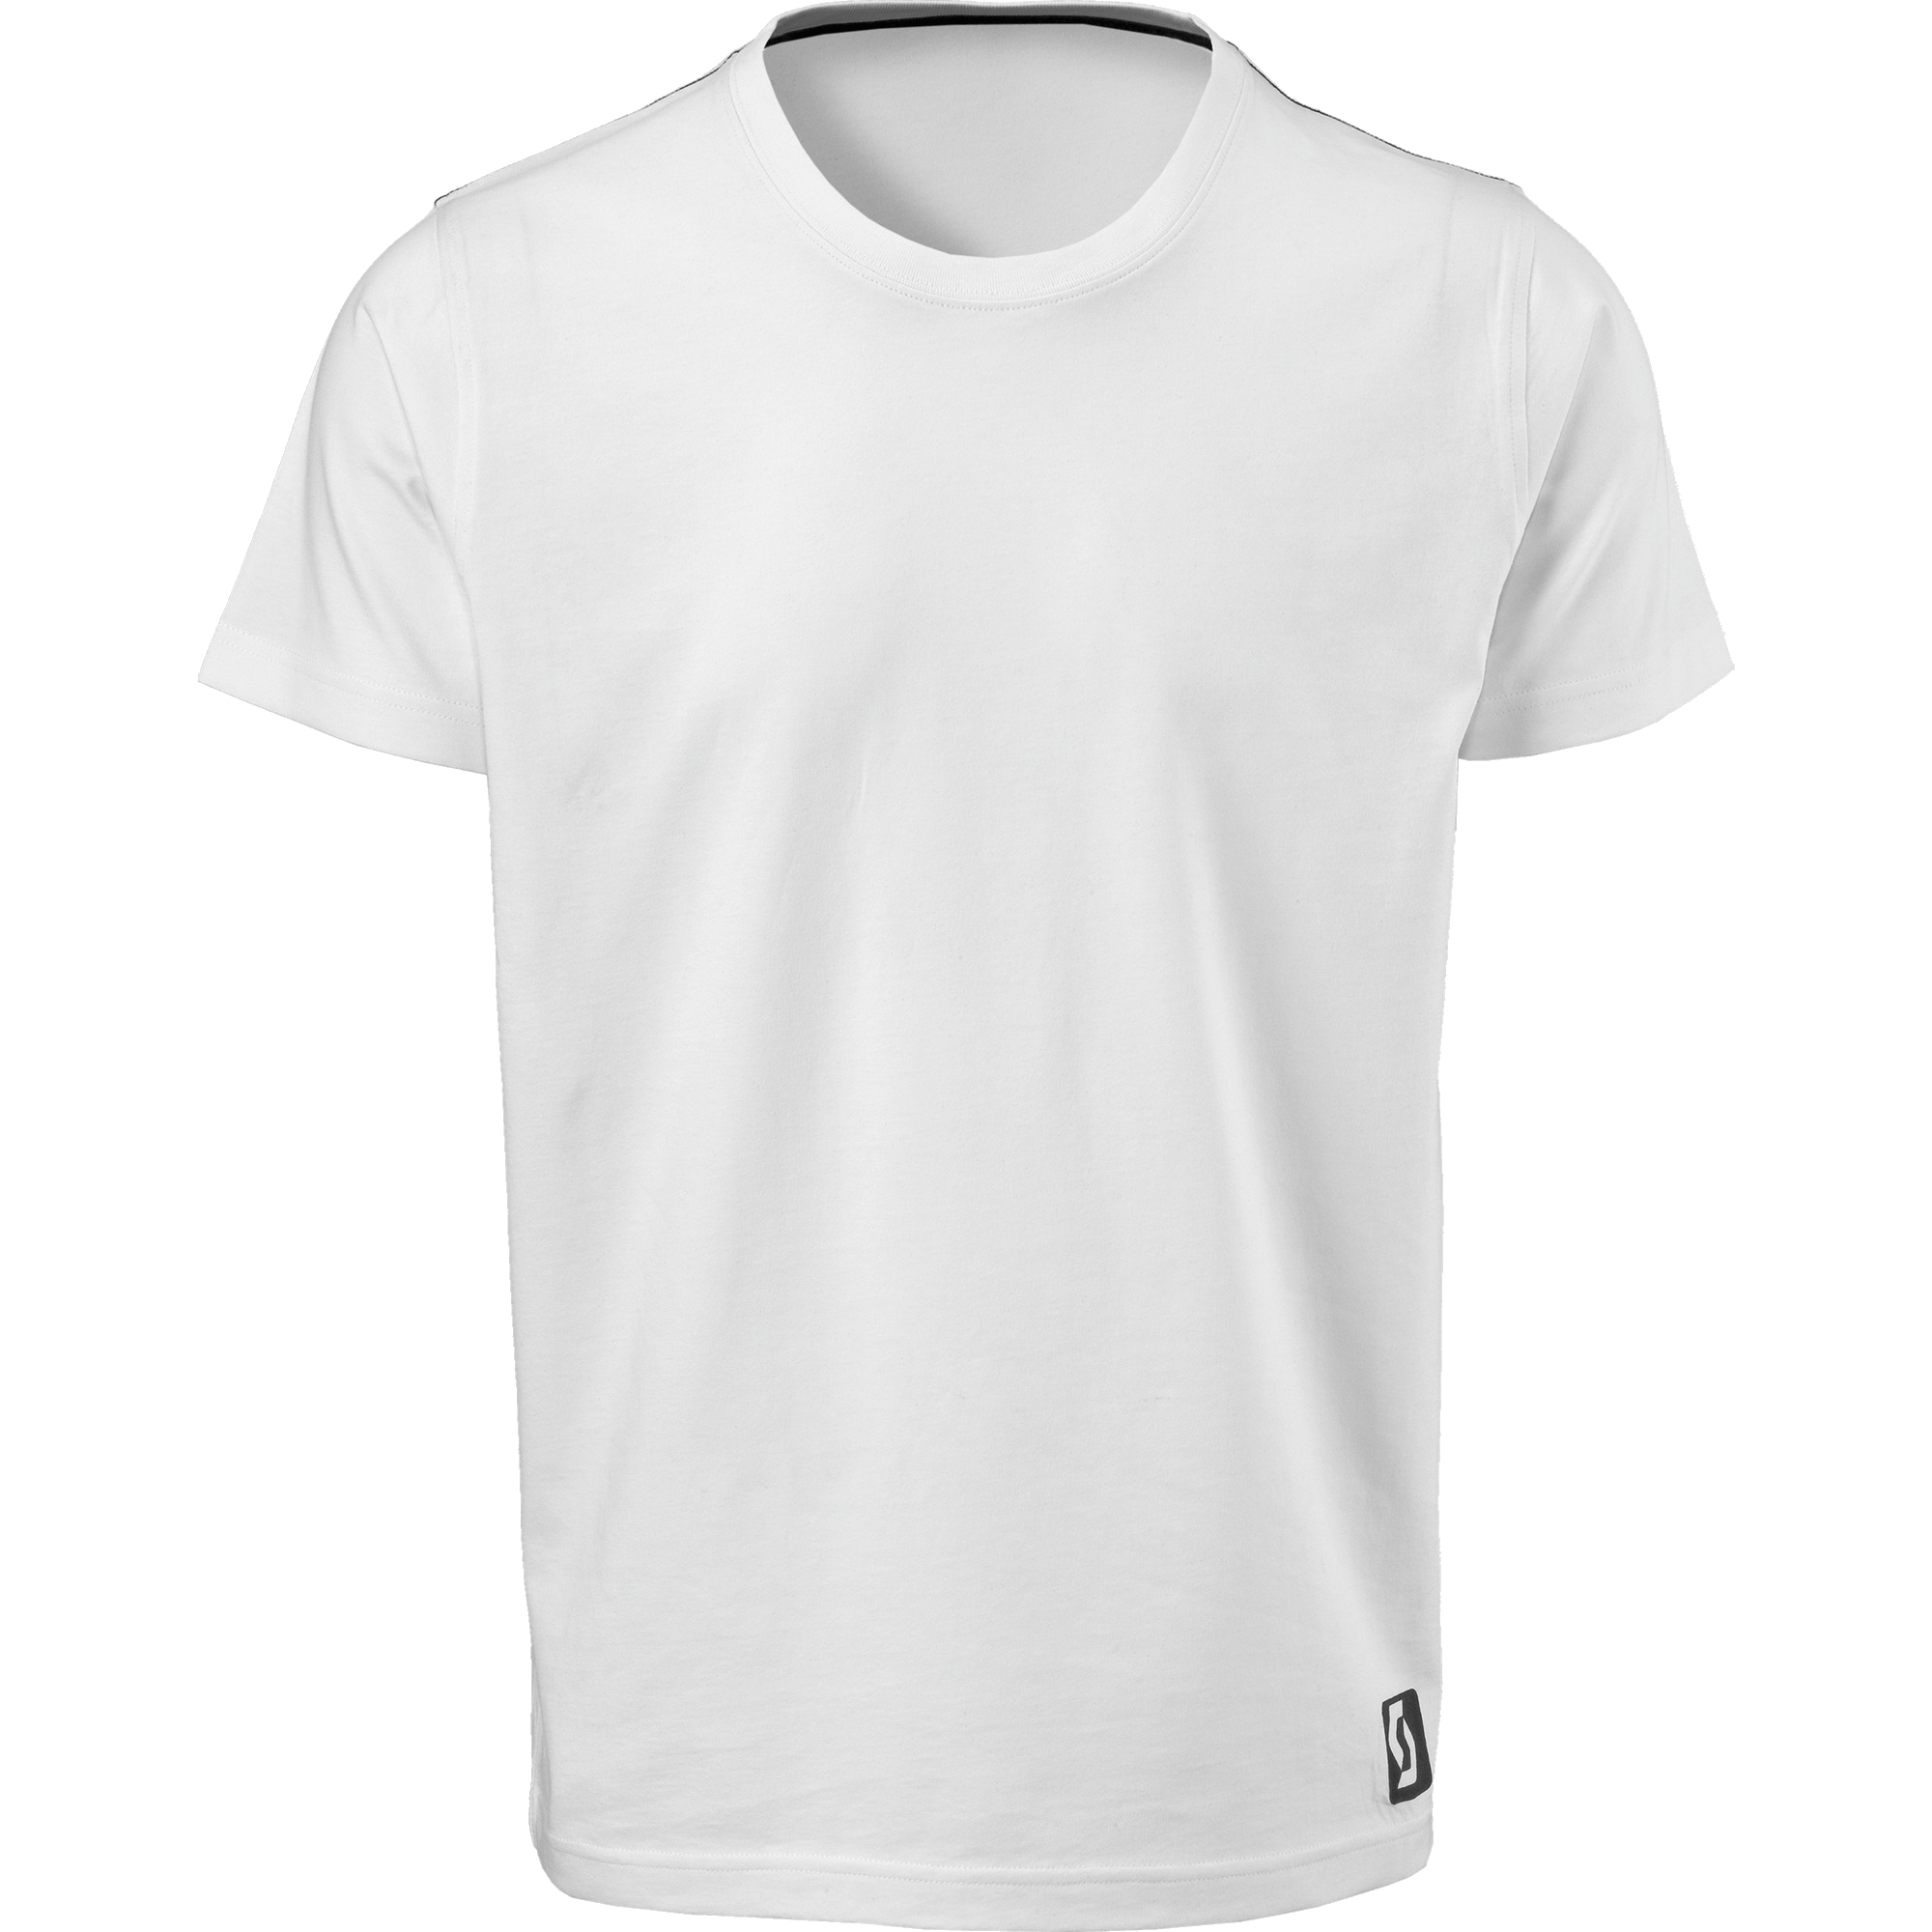 Casual white tee with a relaxed vibe